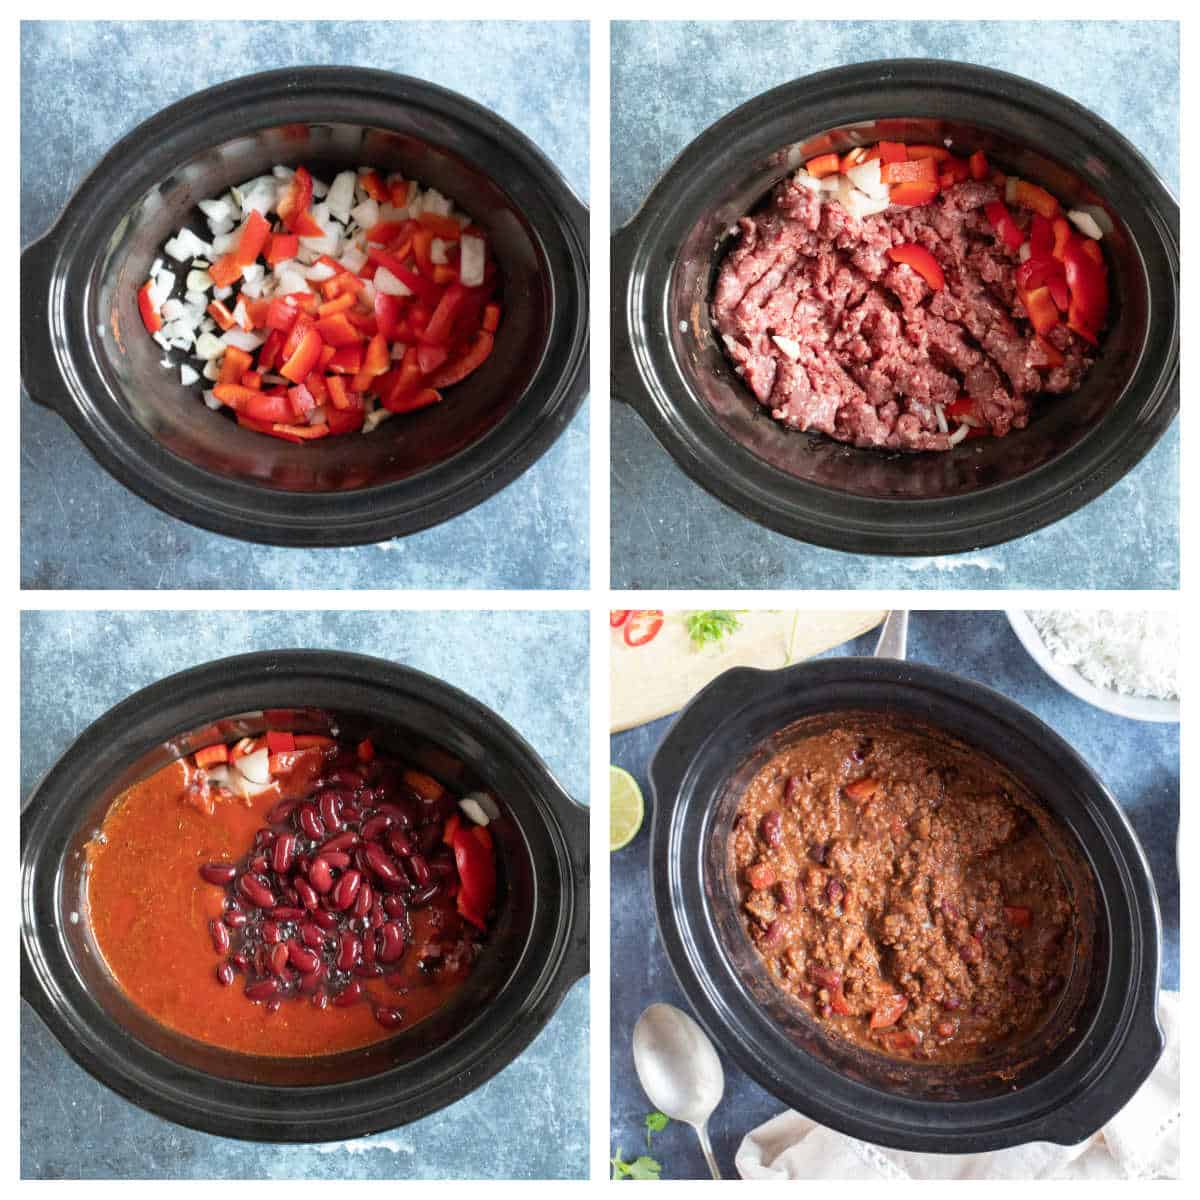 Step by step photo instructions for making chili con carne in a slow cooker.